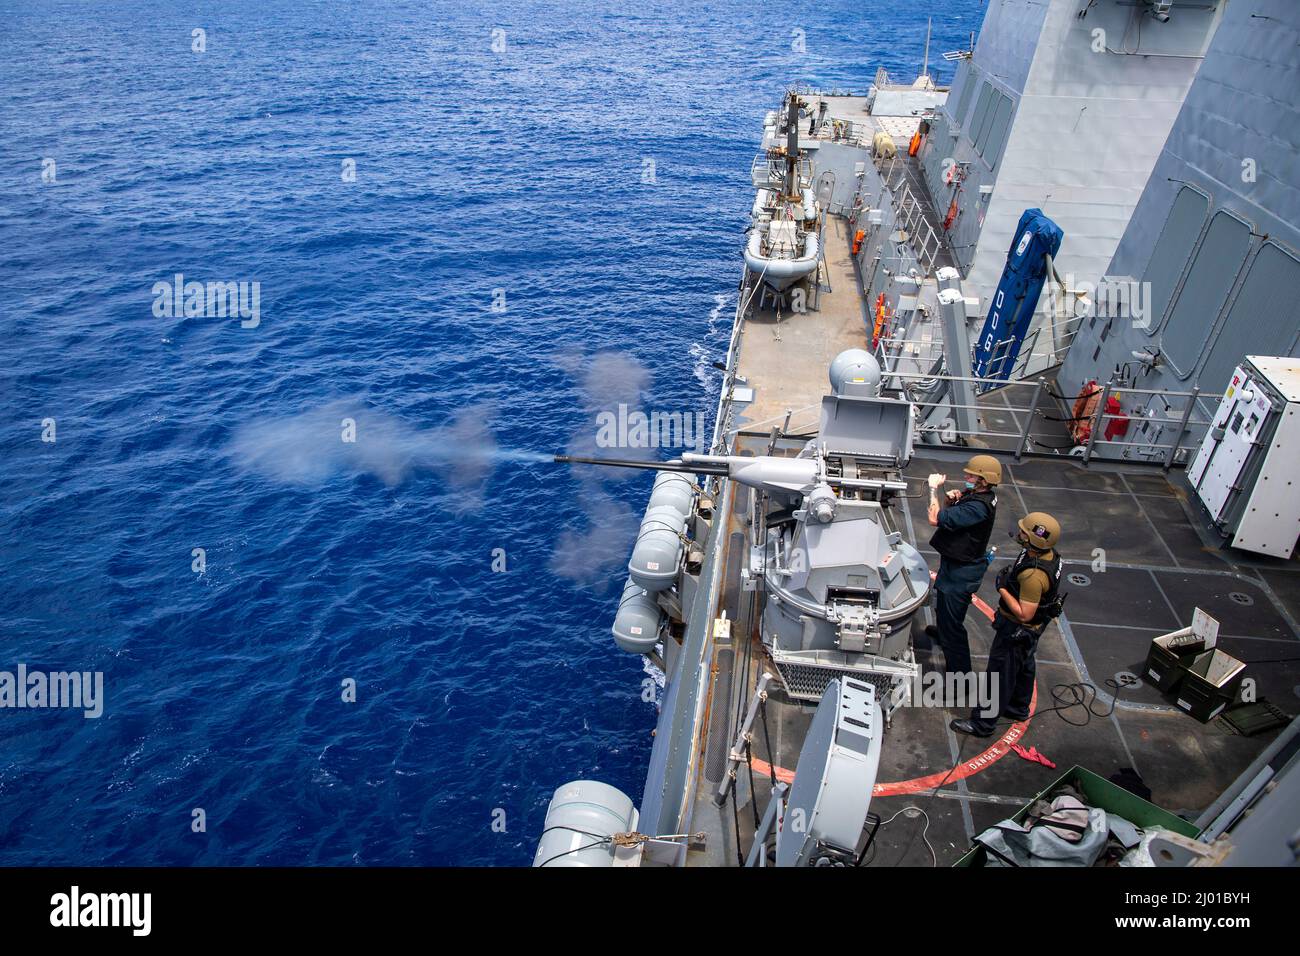 PHILIPPINE SEA (March 13, 2022) Sailors assigned to the Arleigh Burke-class guided-missile destroyer USS Dewey (DDG 105) manually fire the Mark 38 – 25 mm machine gun during a live-fire exercise while conducting routine operations underway in the U.S. 7th Fleet area of responsibility. Dewey is assigned to Destroyer Squadron (DESRON) 15 and is underway supporting a free and open Indo-Pacific. CTF 71/DESRON 15 is the Navy’s largest forward-deployed DESRON and the U.S. 7th Fleet’s principal surface force. (U.S. Navy photo by Mass Communication Specialist 1st Class Benjamin A. Lewis) Stock Photo